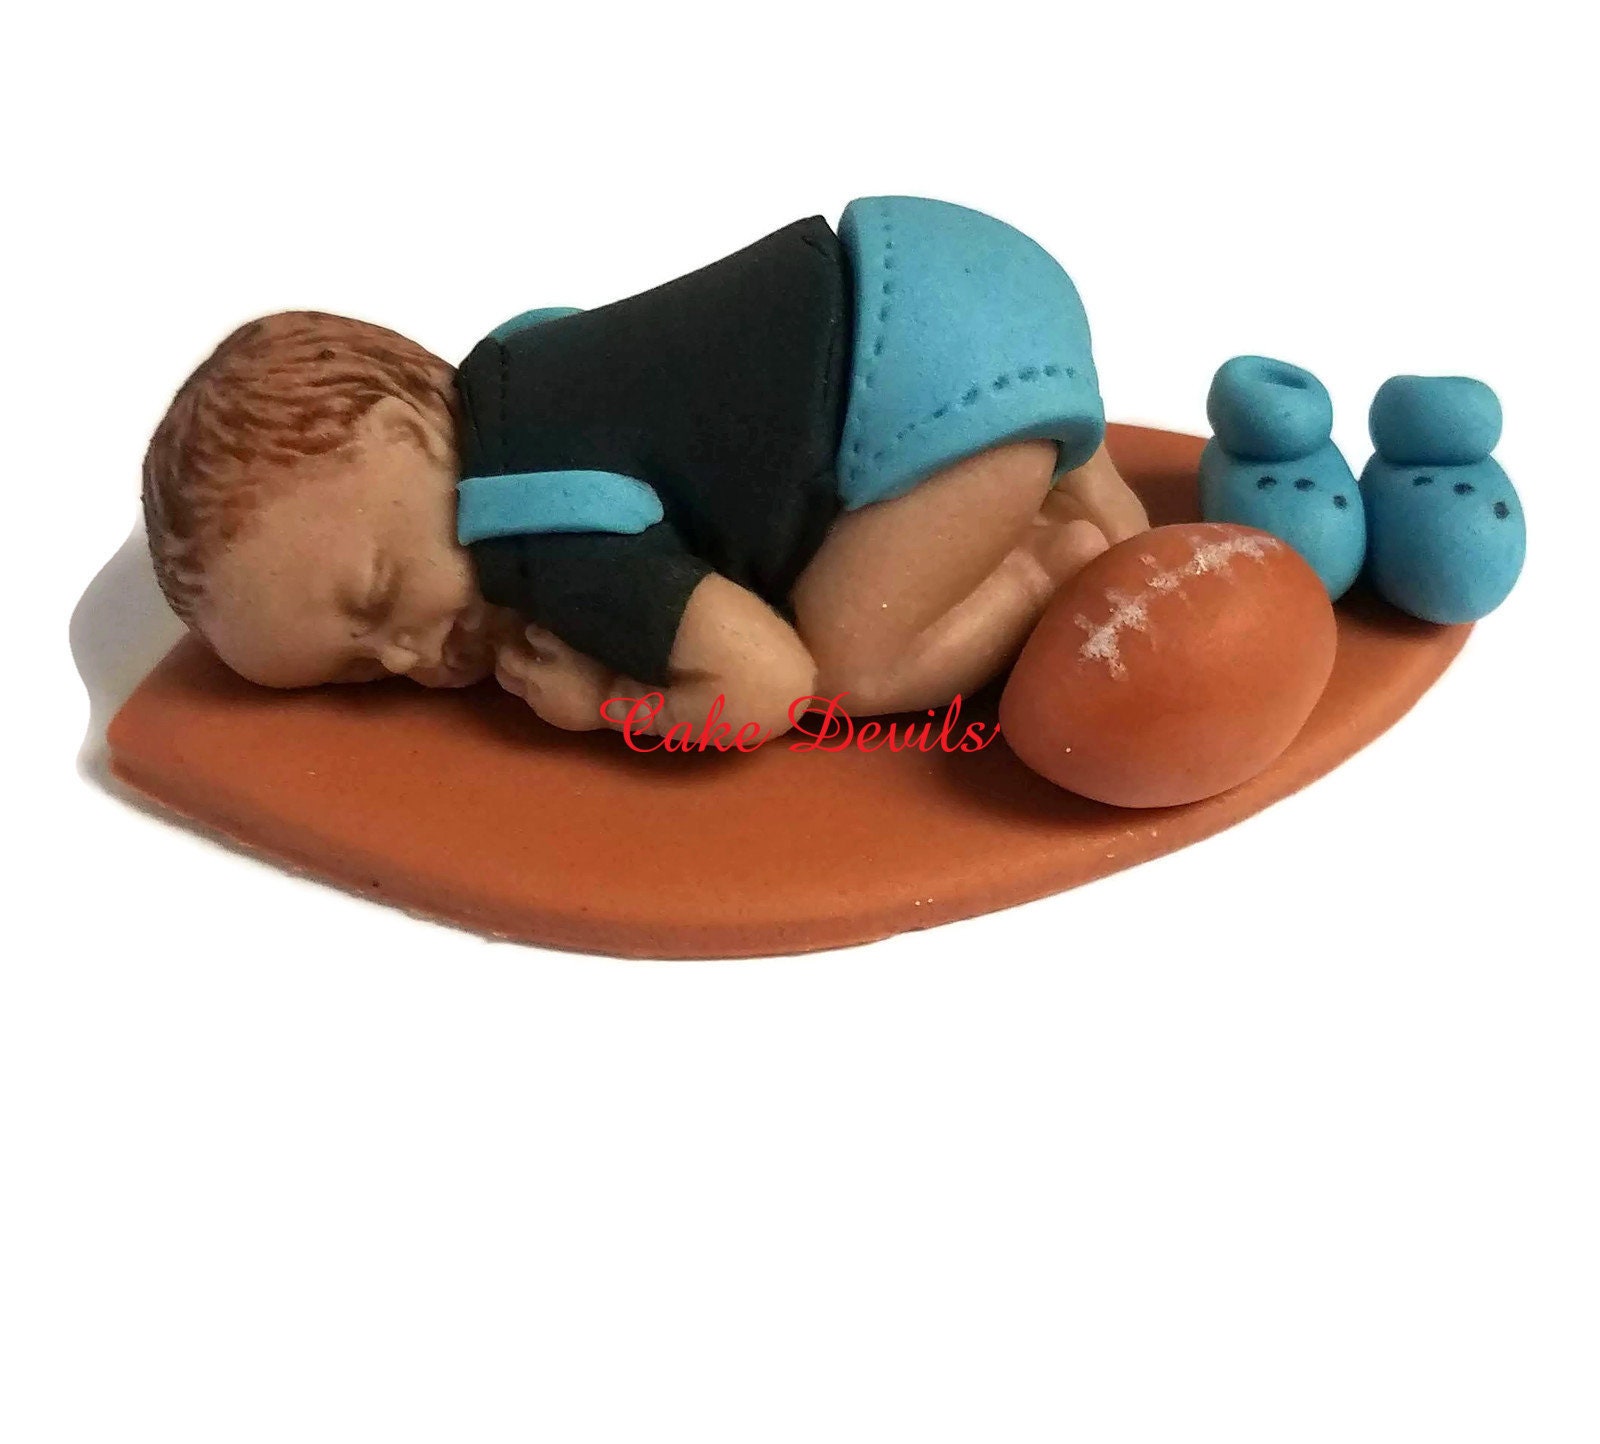 Edible Fondant Baby Decorative Cake Topper Baby in a Shell among Pearls; Sweet Art Atelier